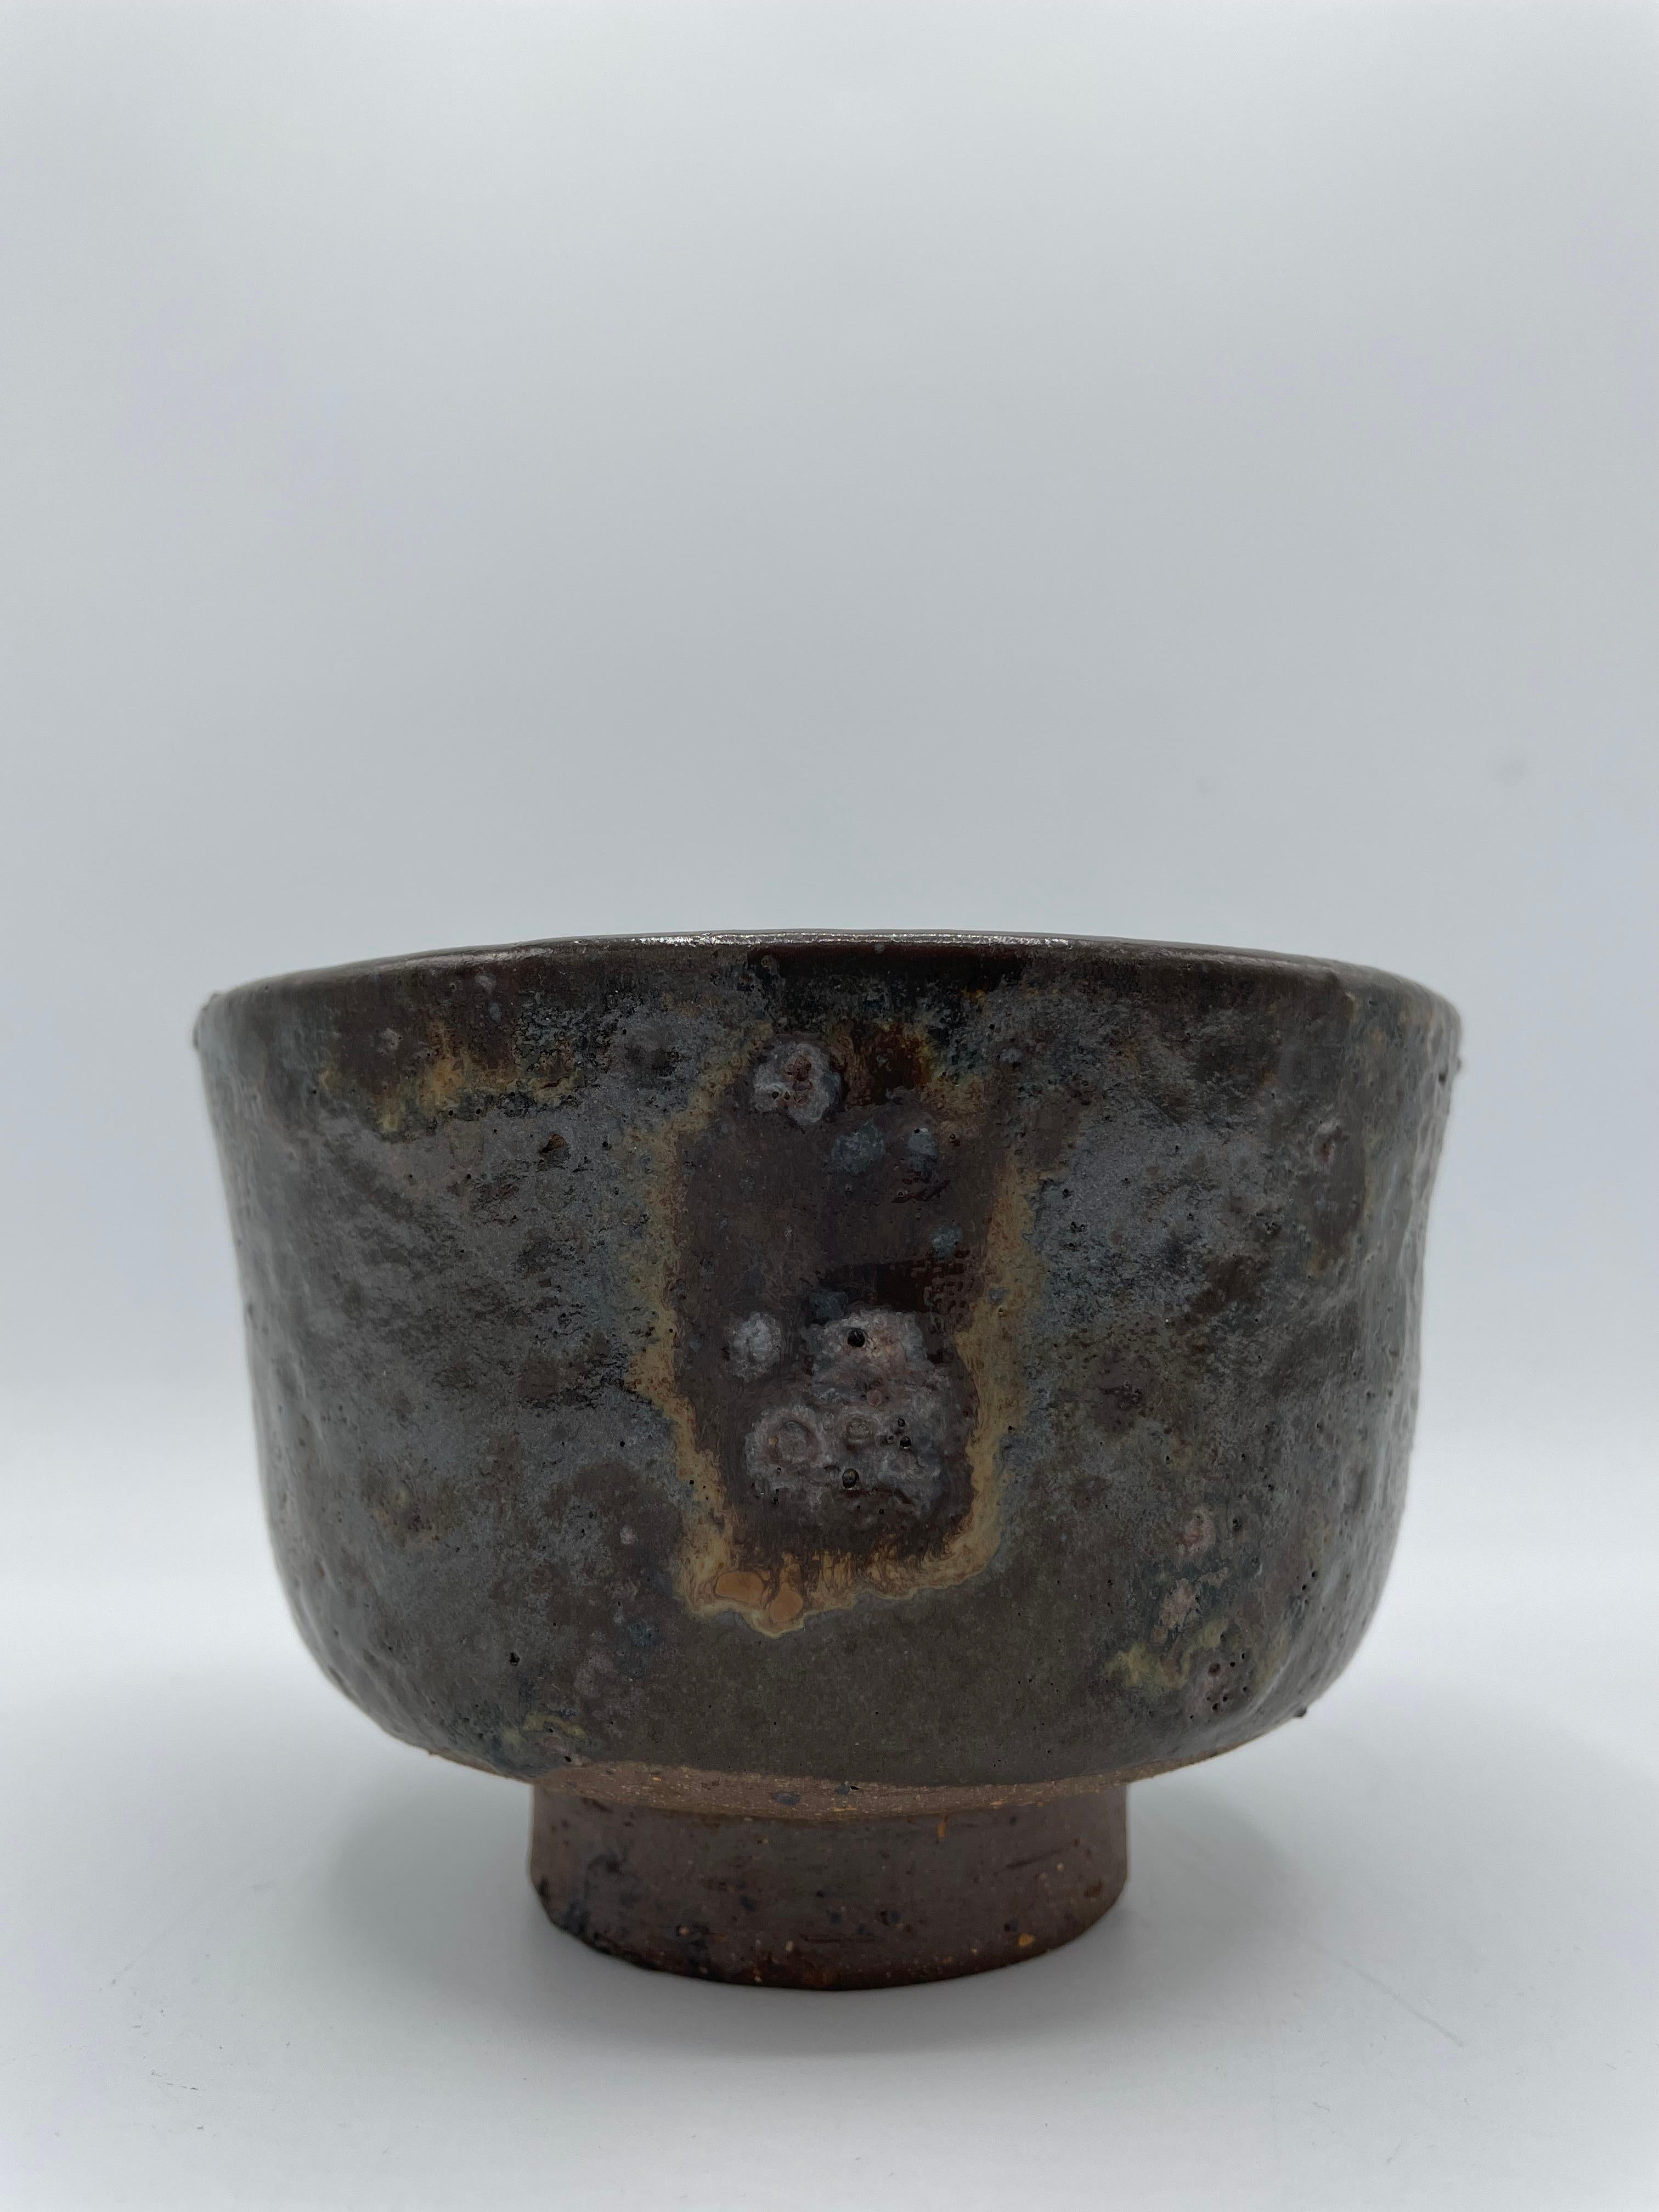 This is a matcha bowl which we use for tea ceremony.
It was made around Showa era 1970s.
The materials are porcelain.

Dimensions:
H 8.2 x 12.5 x 12.5 cm